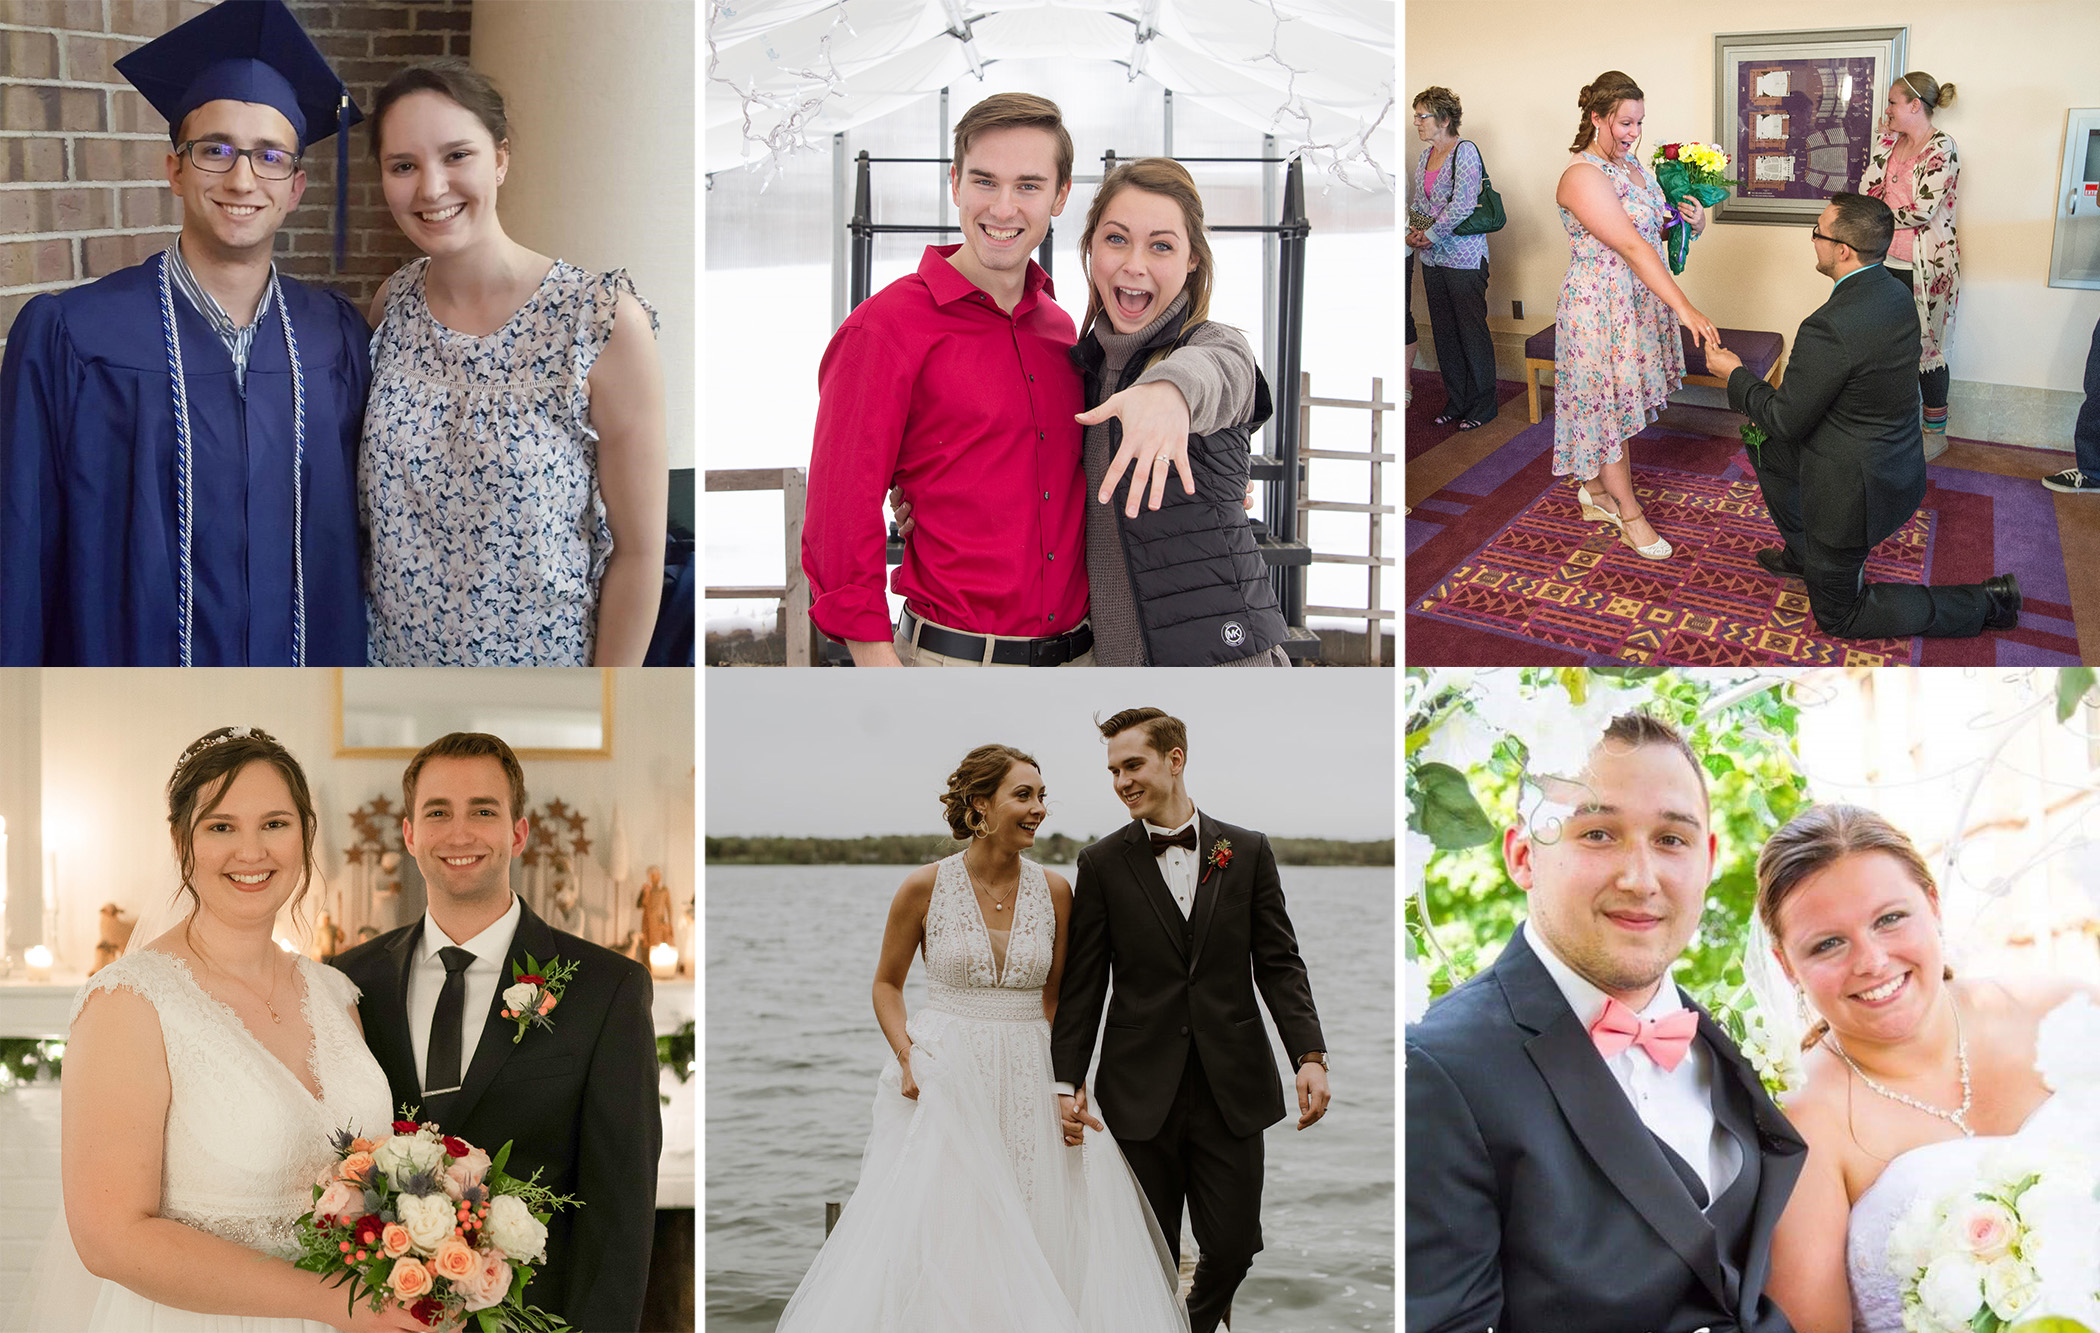 A collage of photos of the couples featured in the article, including a photo of each couple before getting married and after.